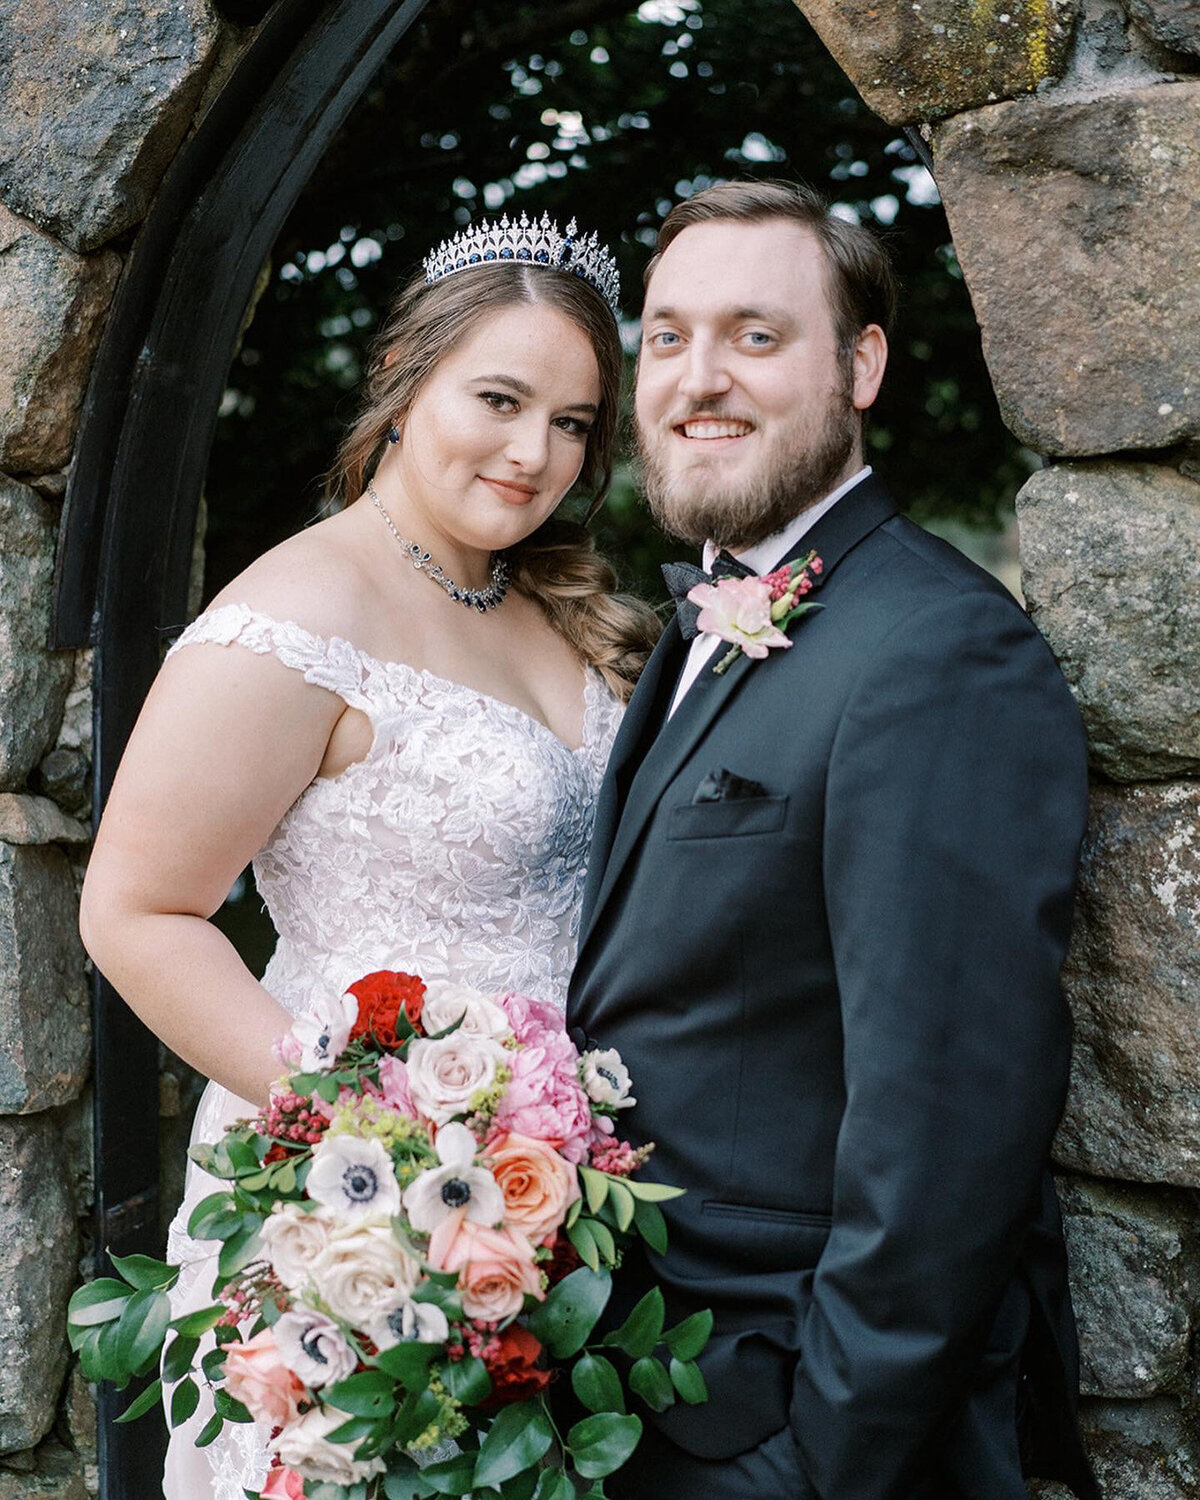 Bride and groom photo while bride holding her floral bouquet